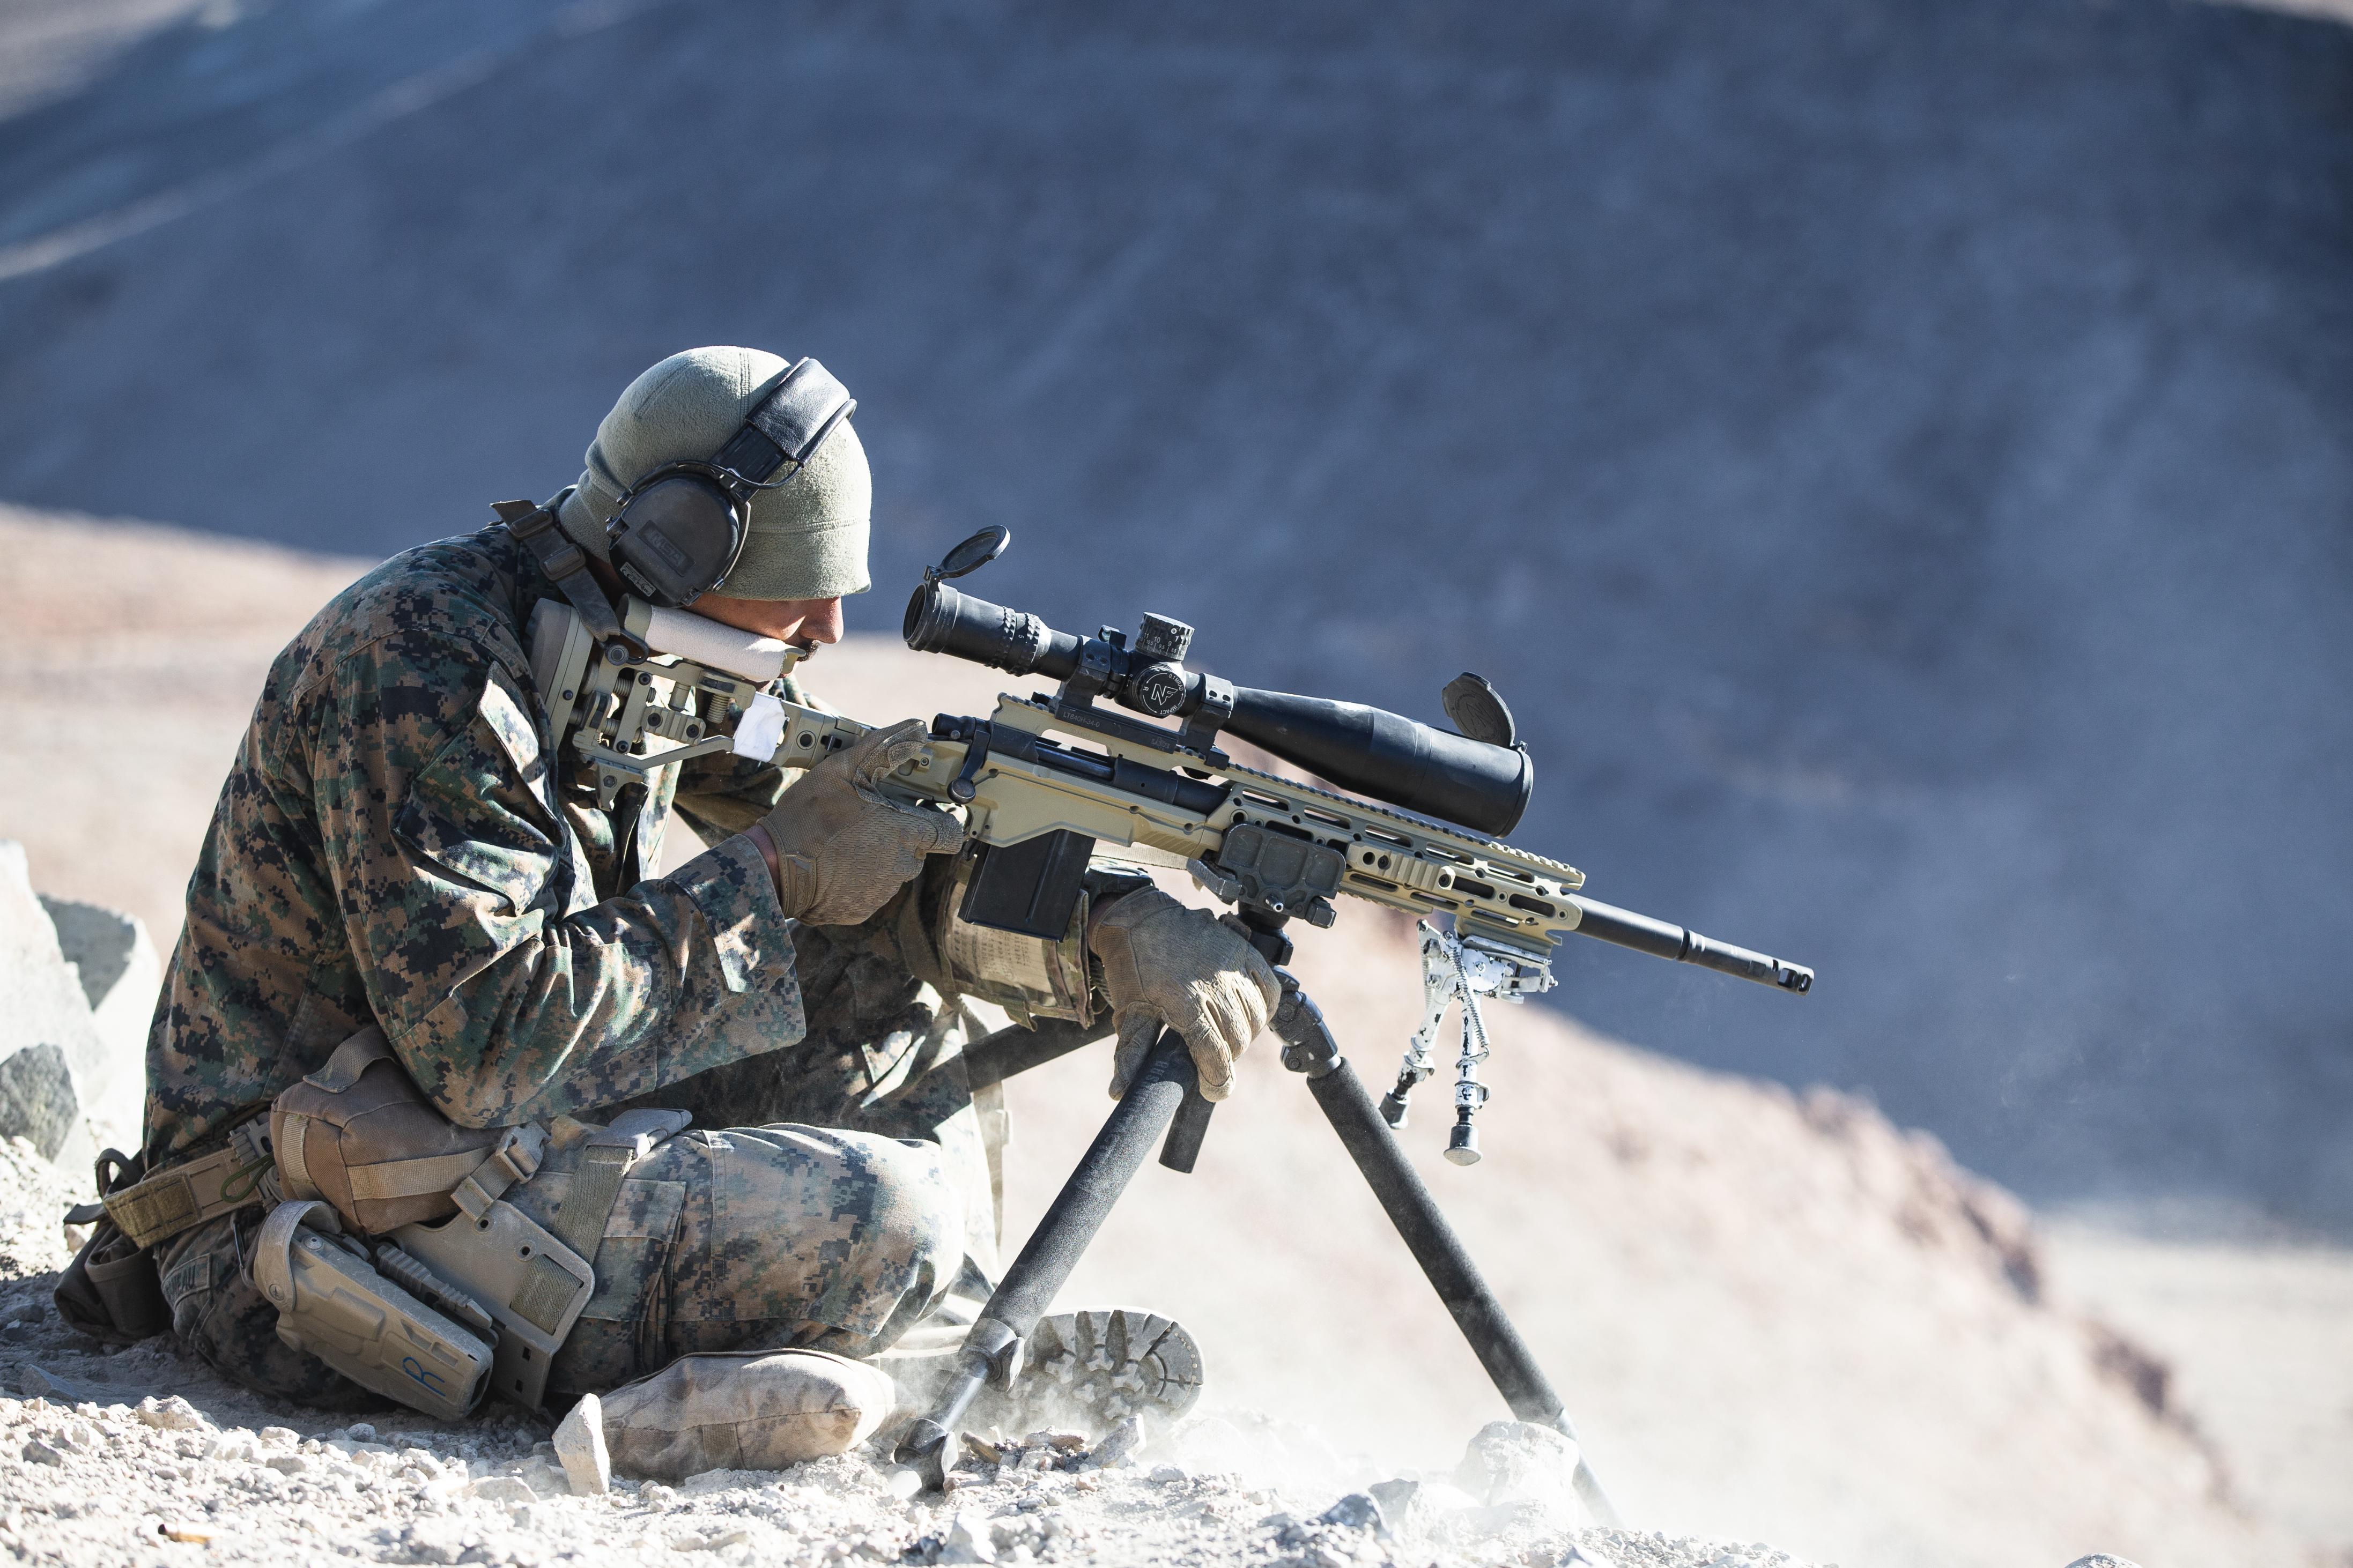 U.S. Marine Corps Cpl. Tyler Duchesneau, a Scout Sniper with Weapons Company, 1st Battalion, 4th Marine Regiment, engages downhill targets with a M40A6 Sniper Rifle during Mountain Scout Sniper Course at Hawthorne Army Depot, Hawthorne, Nevada, Feb. 1, 2022. Marines trained to shoot at high angles in complex weather conditions, preparing them for operations in mountainous environments. (U.S. Marine Corps photo by Lance Cpl. Andrew R. Bray)